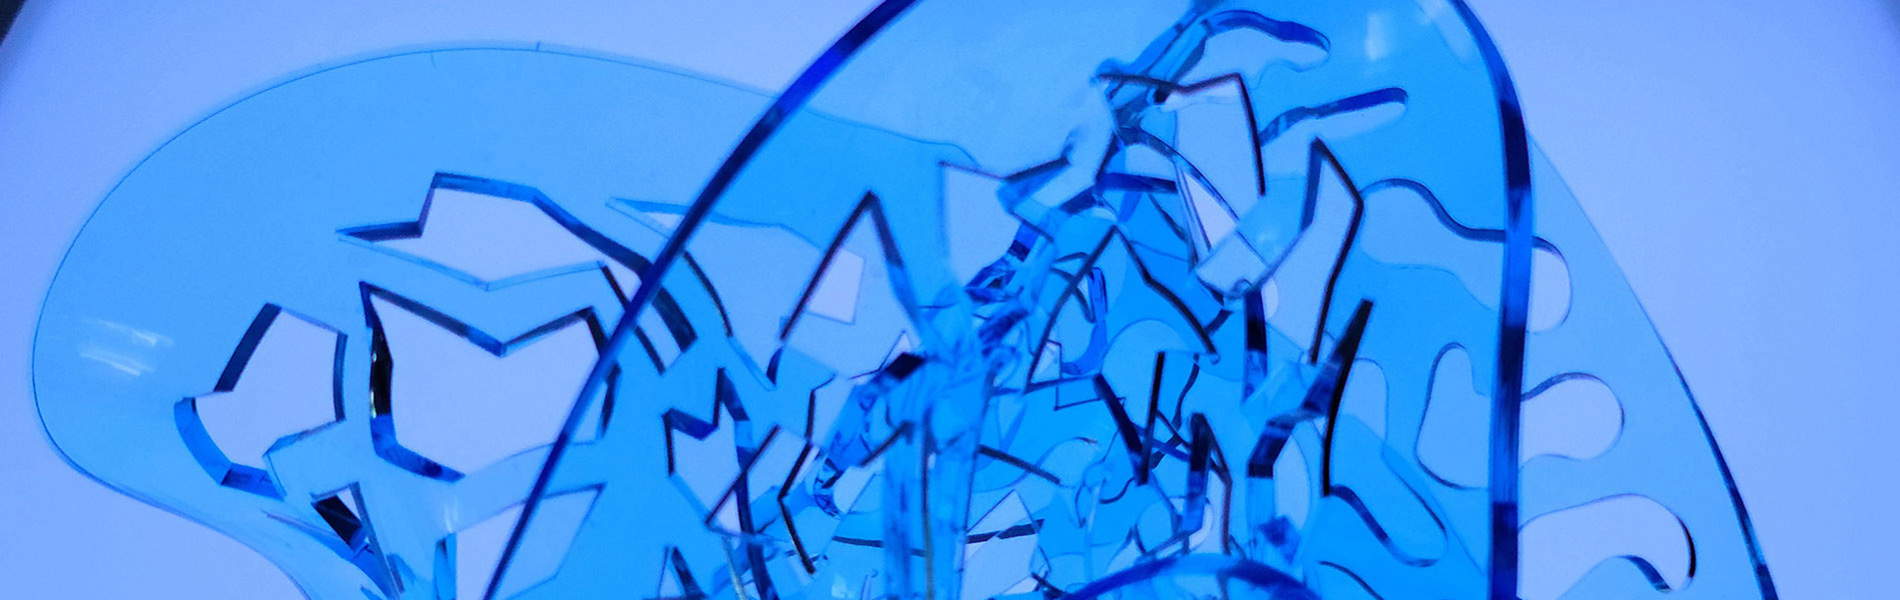 Sculpture exhibit — twisted blue acrylic called right brain, left brain together